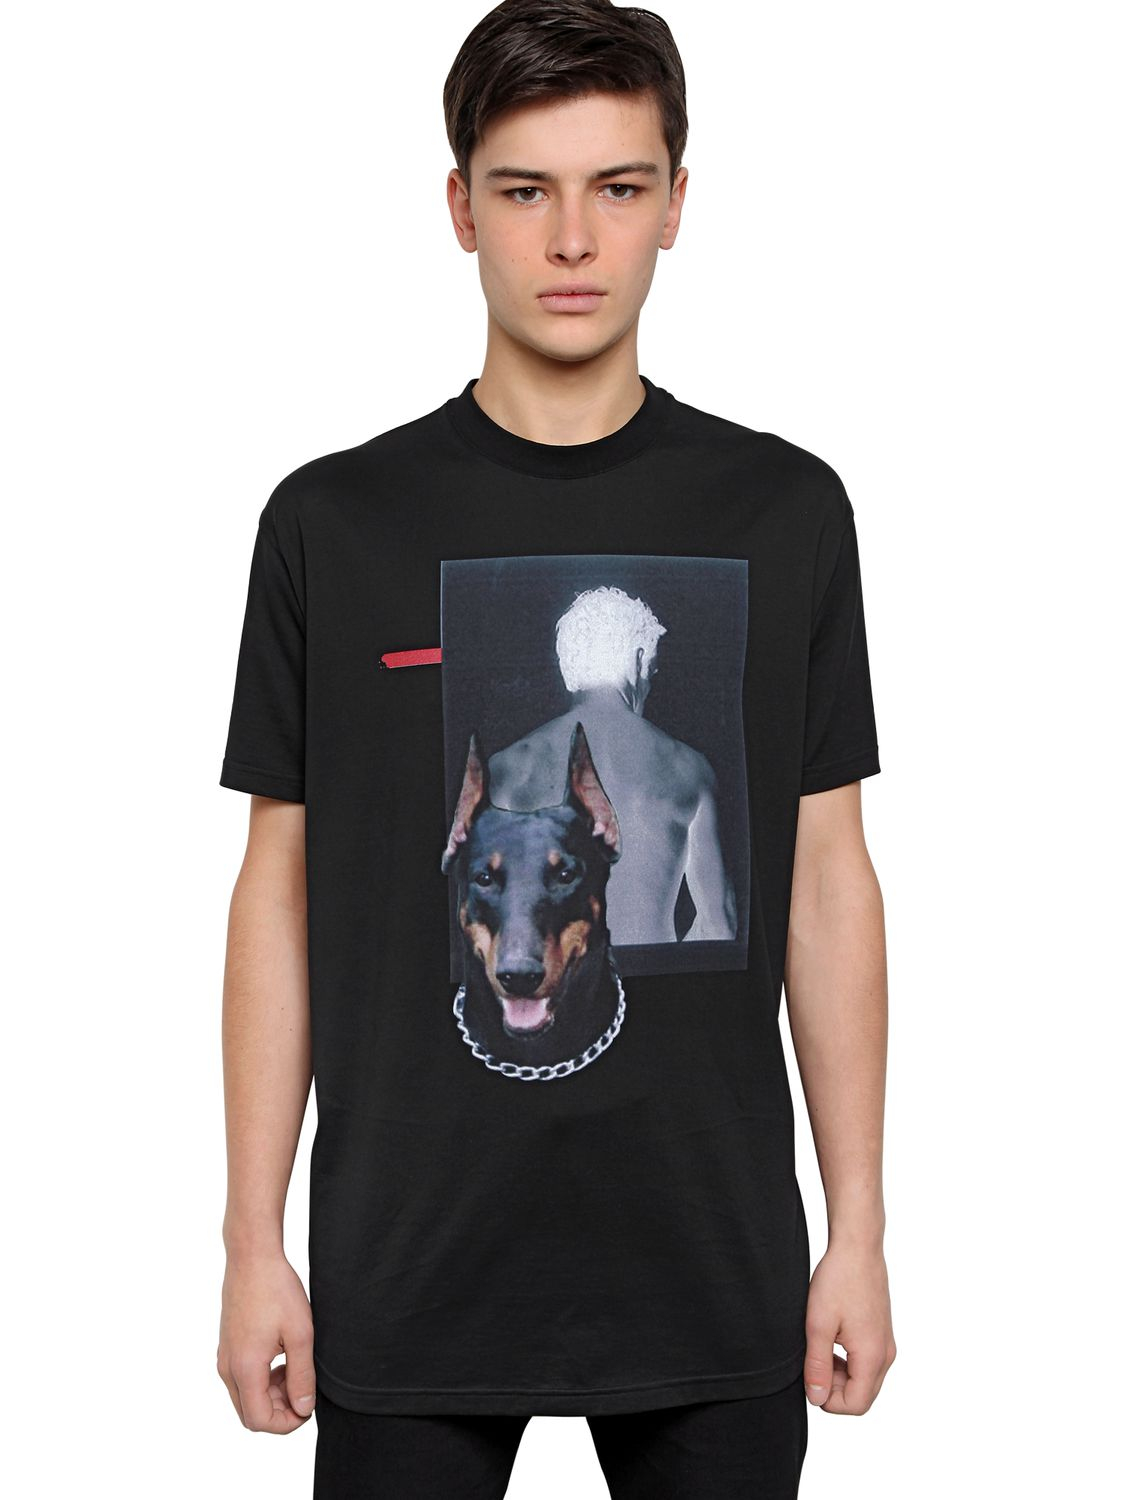 Givenchy Men's T-Shirts for sale | eBay Givenchy t shirt black and